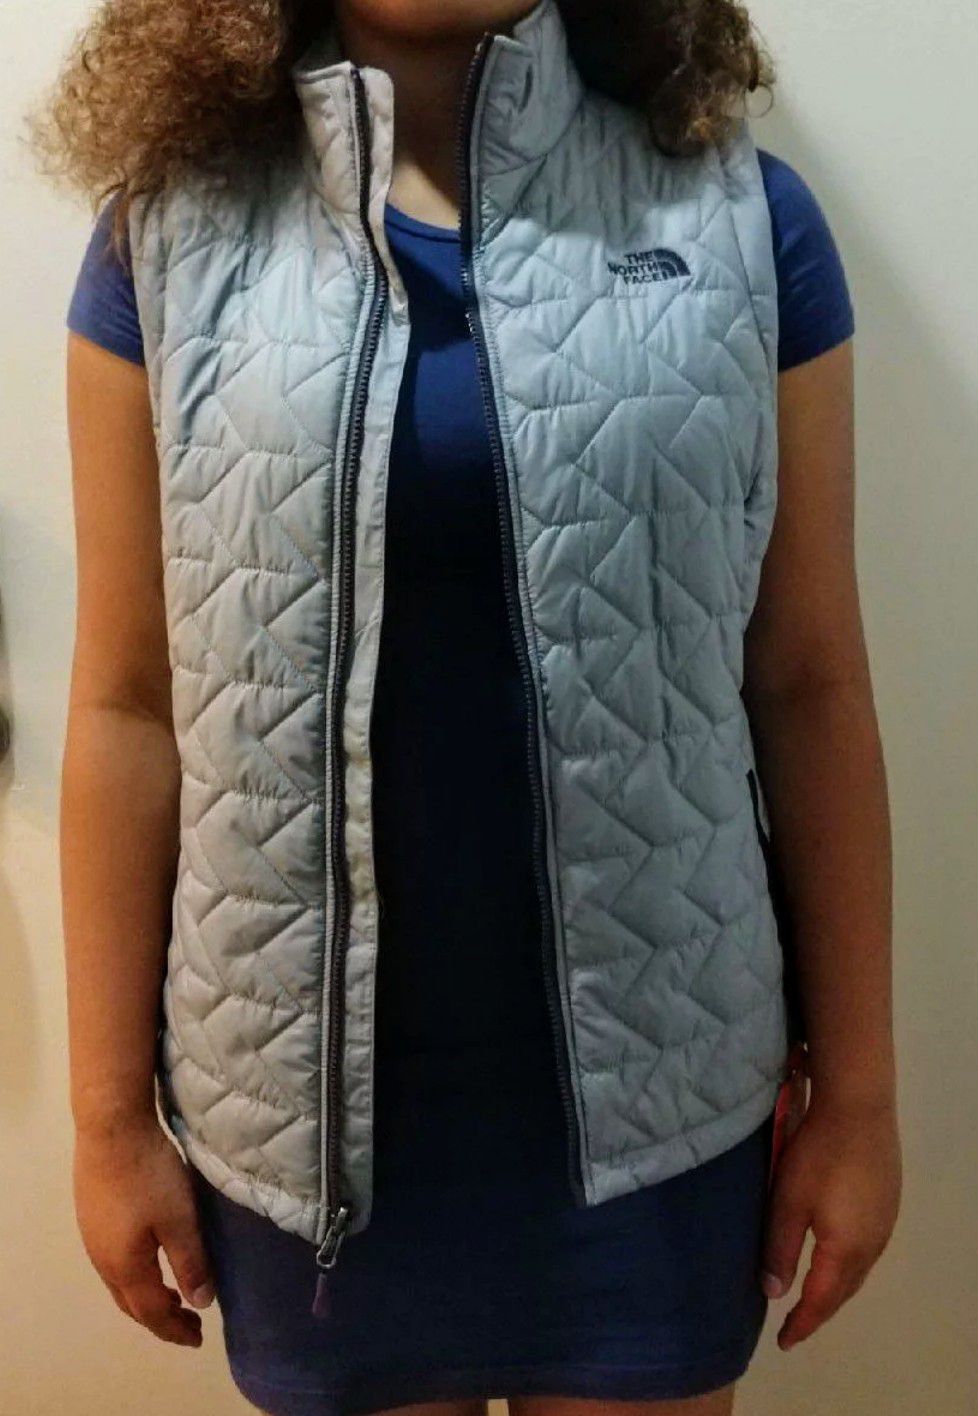 Brand new North Face vest.